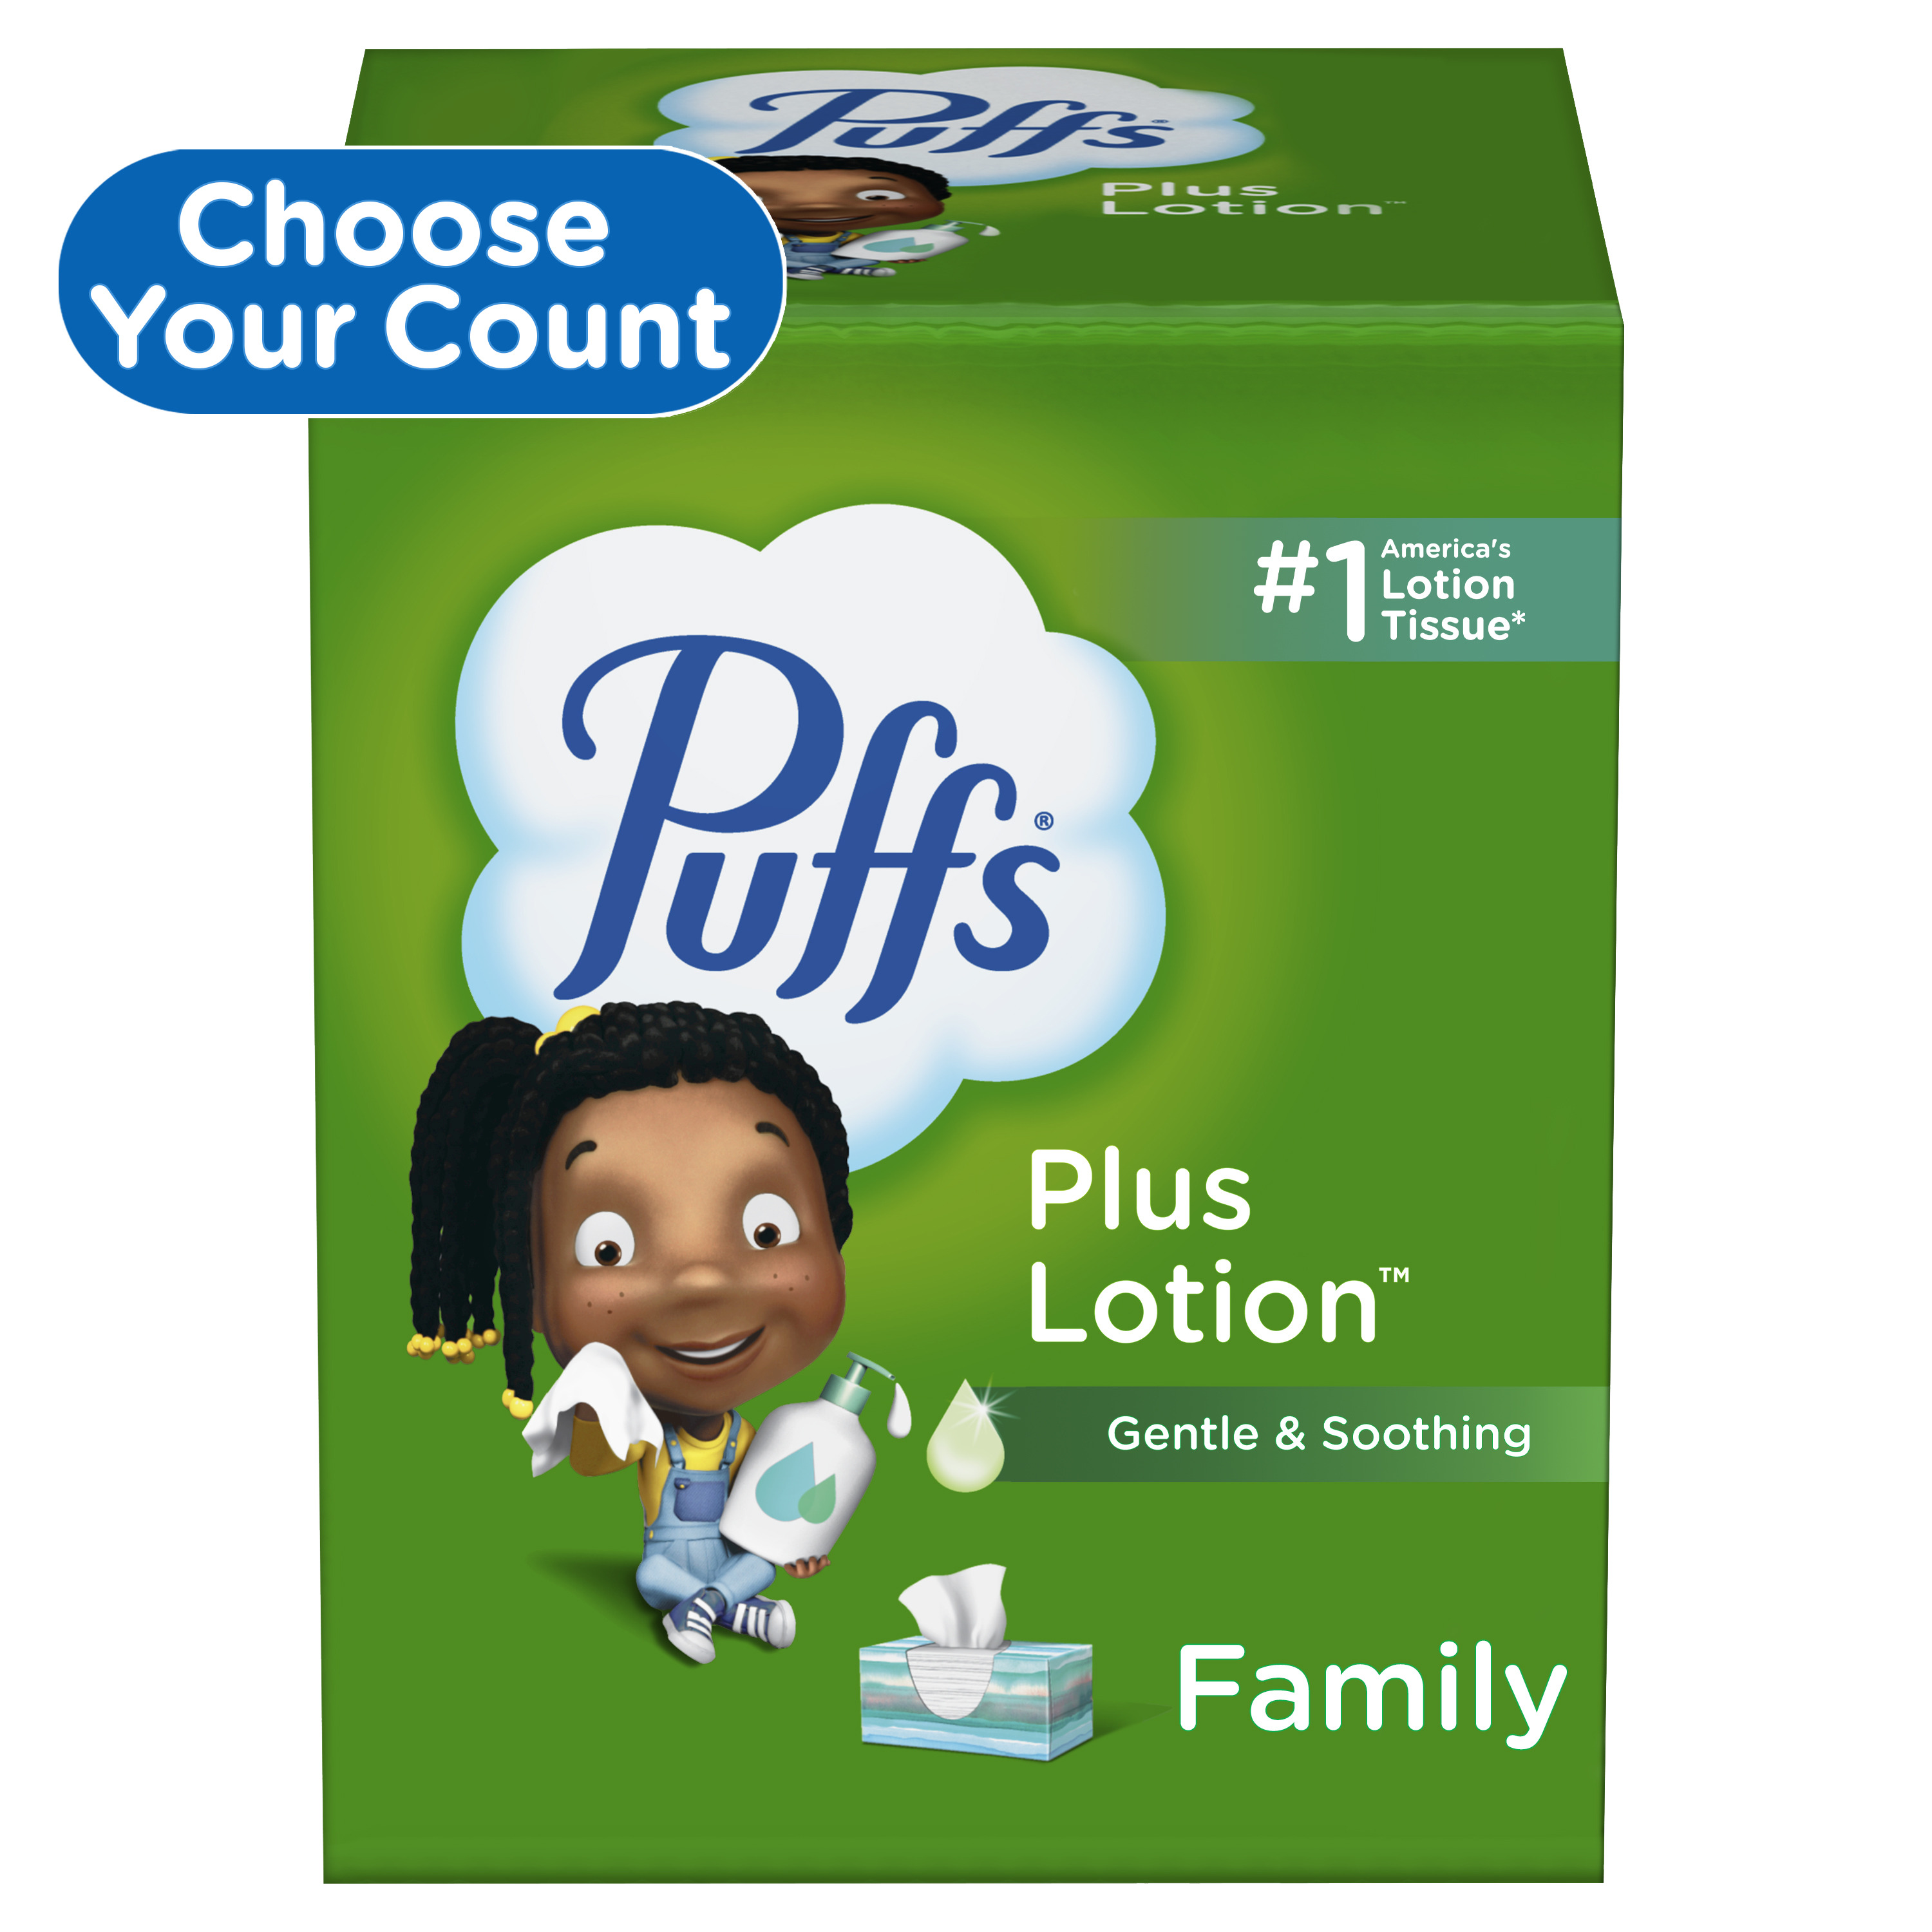 Puffs Plus Lotion Facial Tissue, 6 Family Size Boxes, 124 Tissues per Box, Green - image 1 of 13